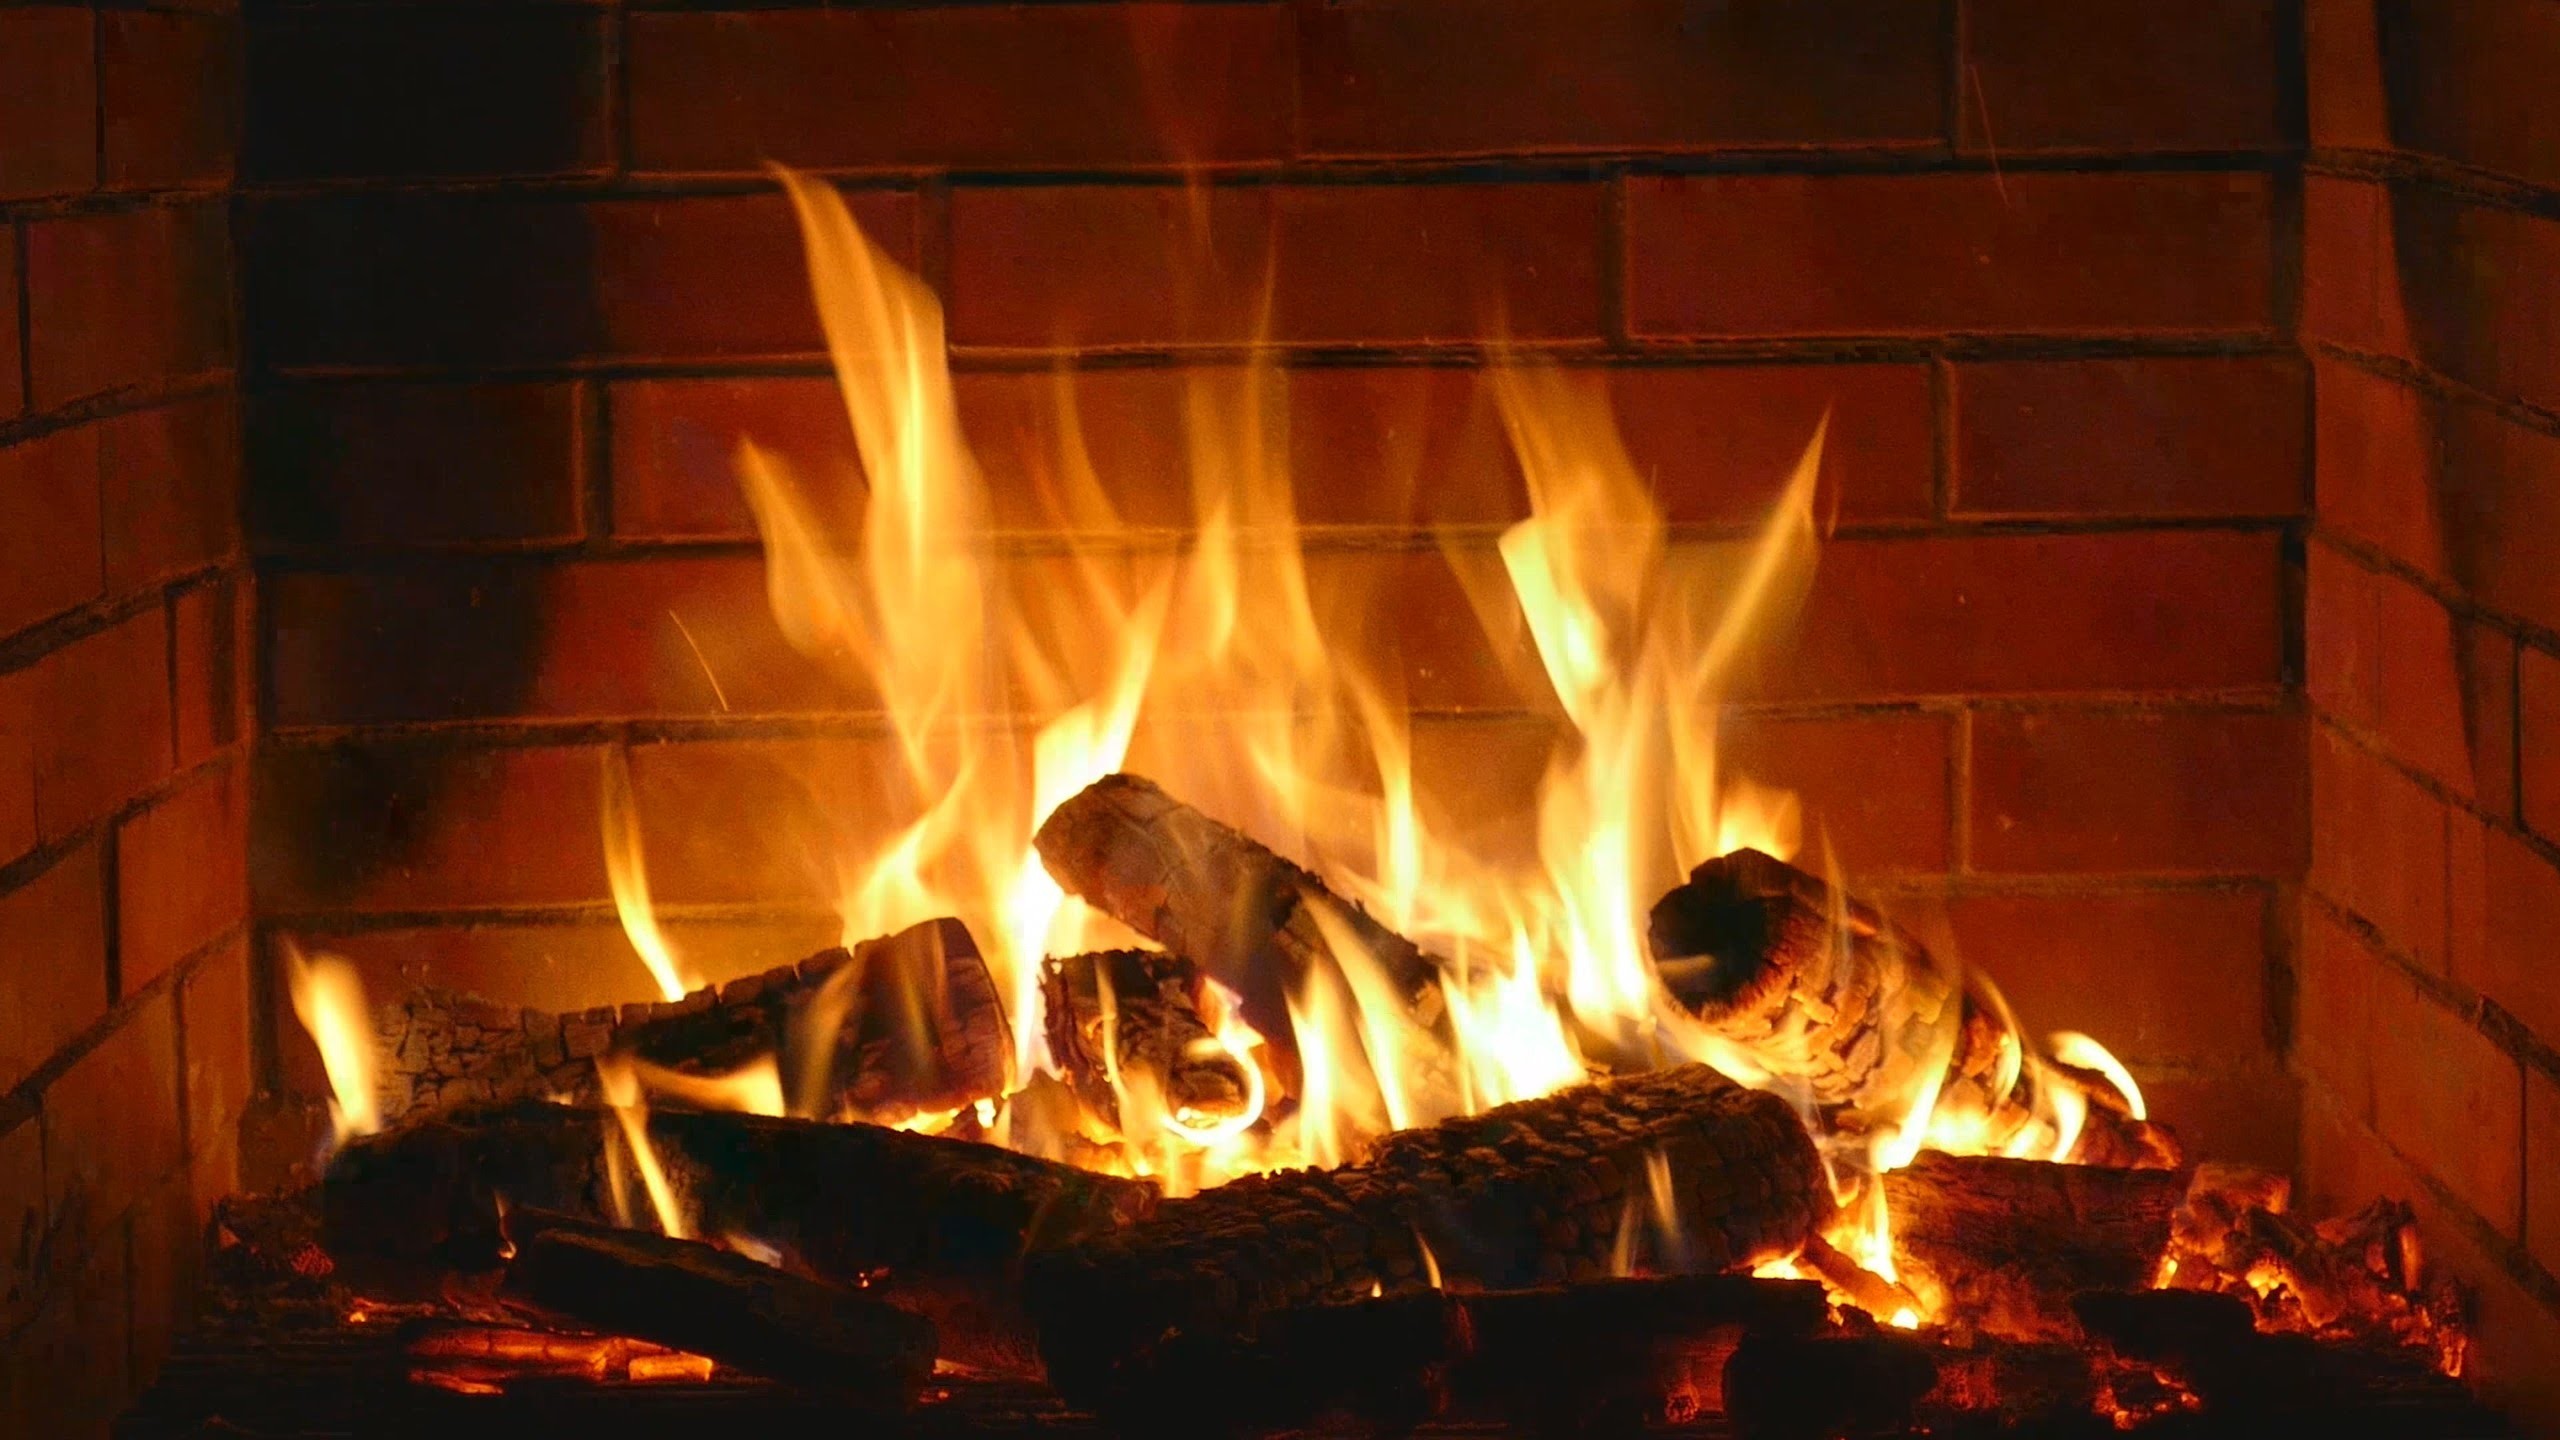 download the last version for windows Fireplace Live HD Screensaver